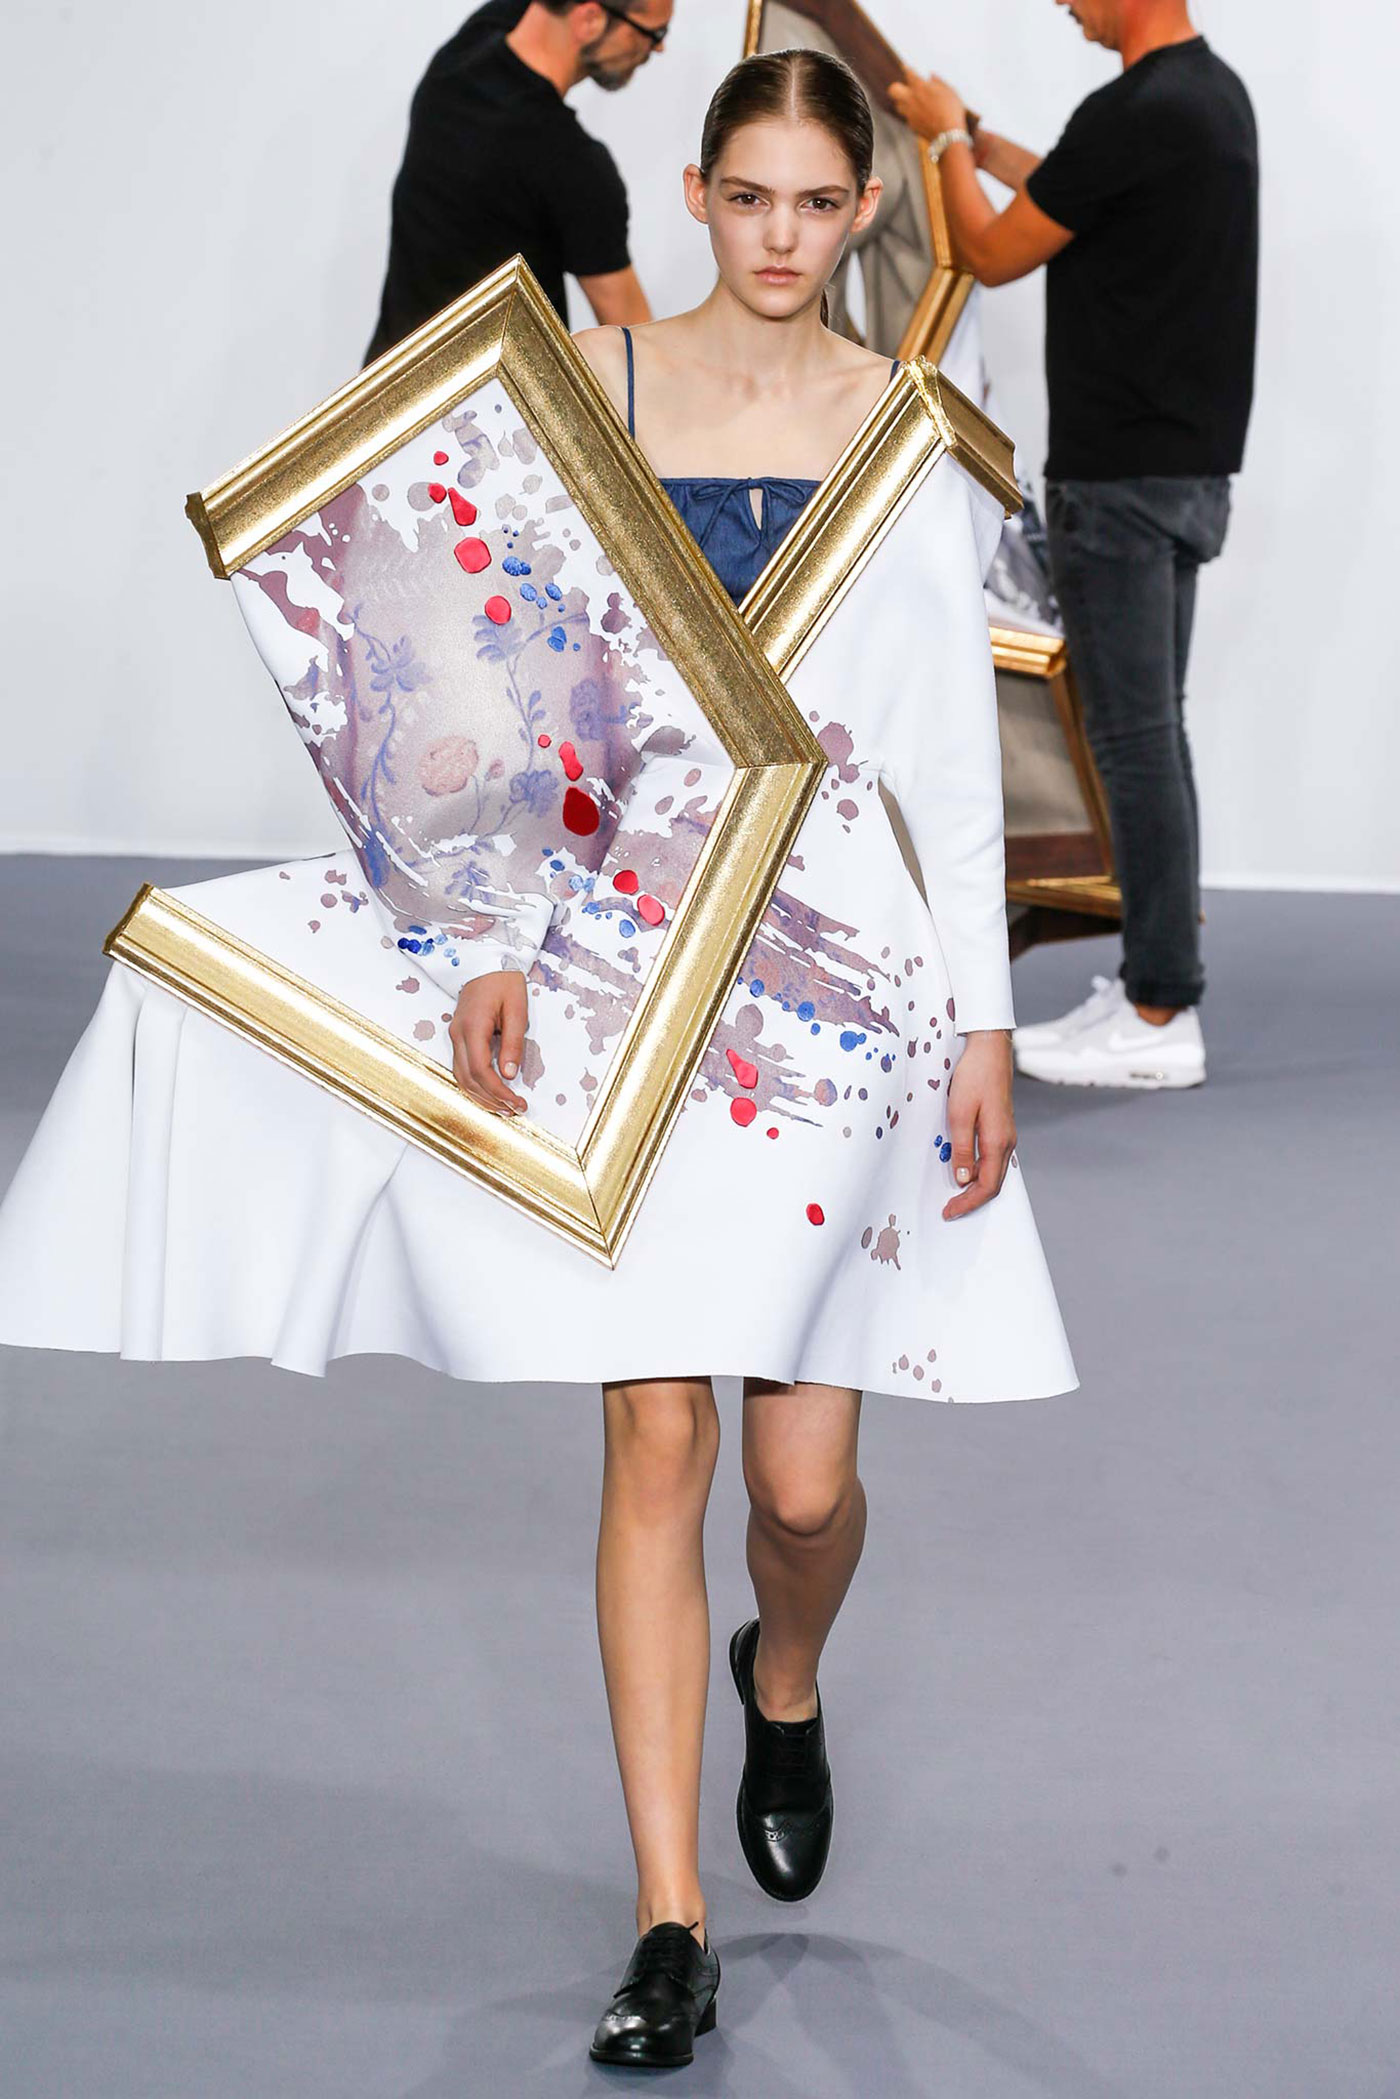 Viktor and Rolf Haute Couture Fall 2015 collection